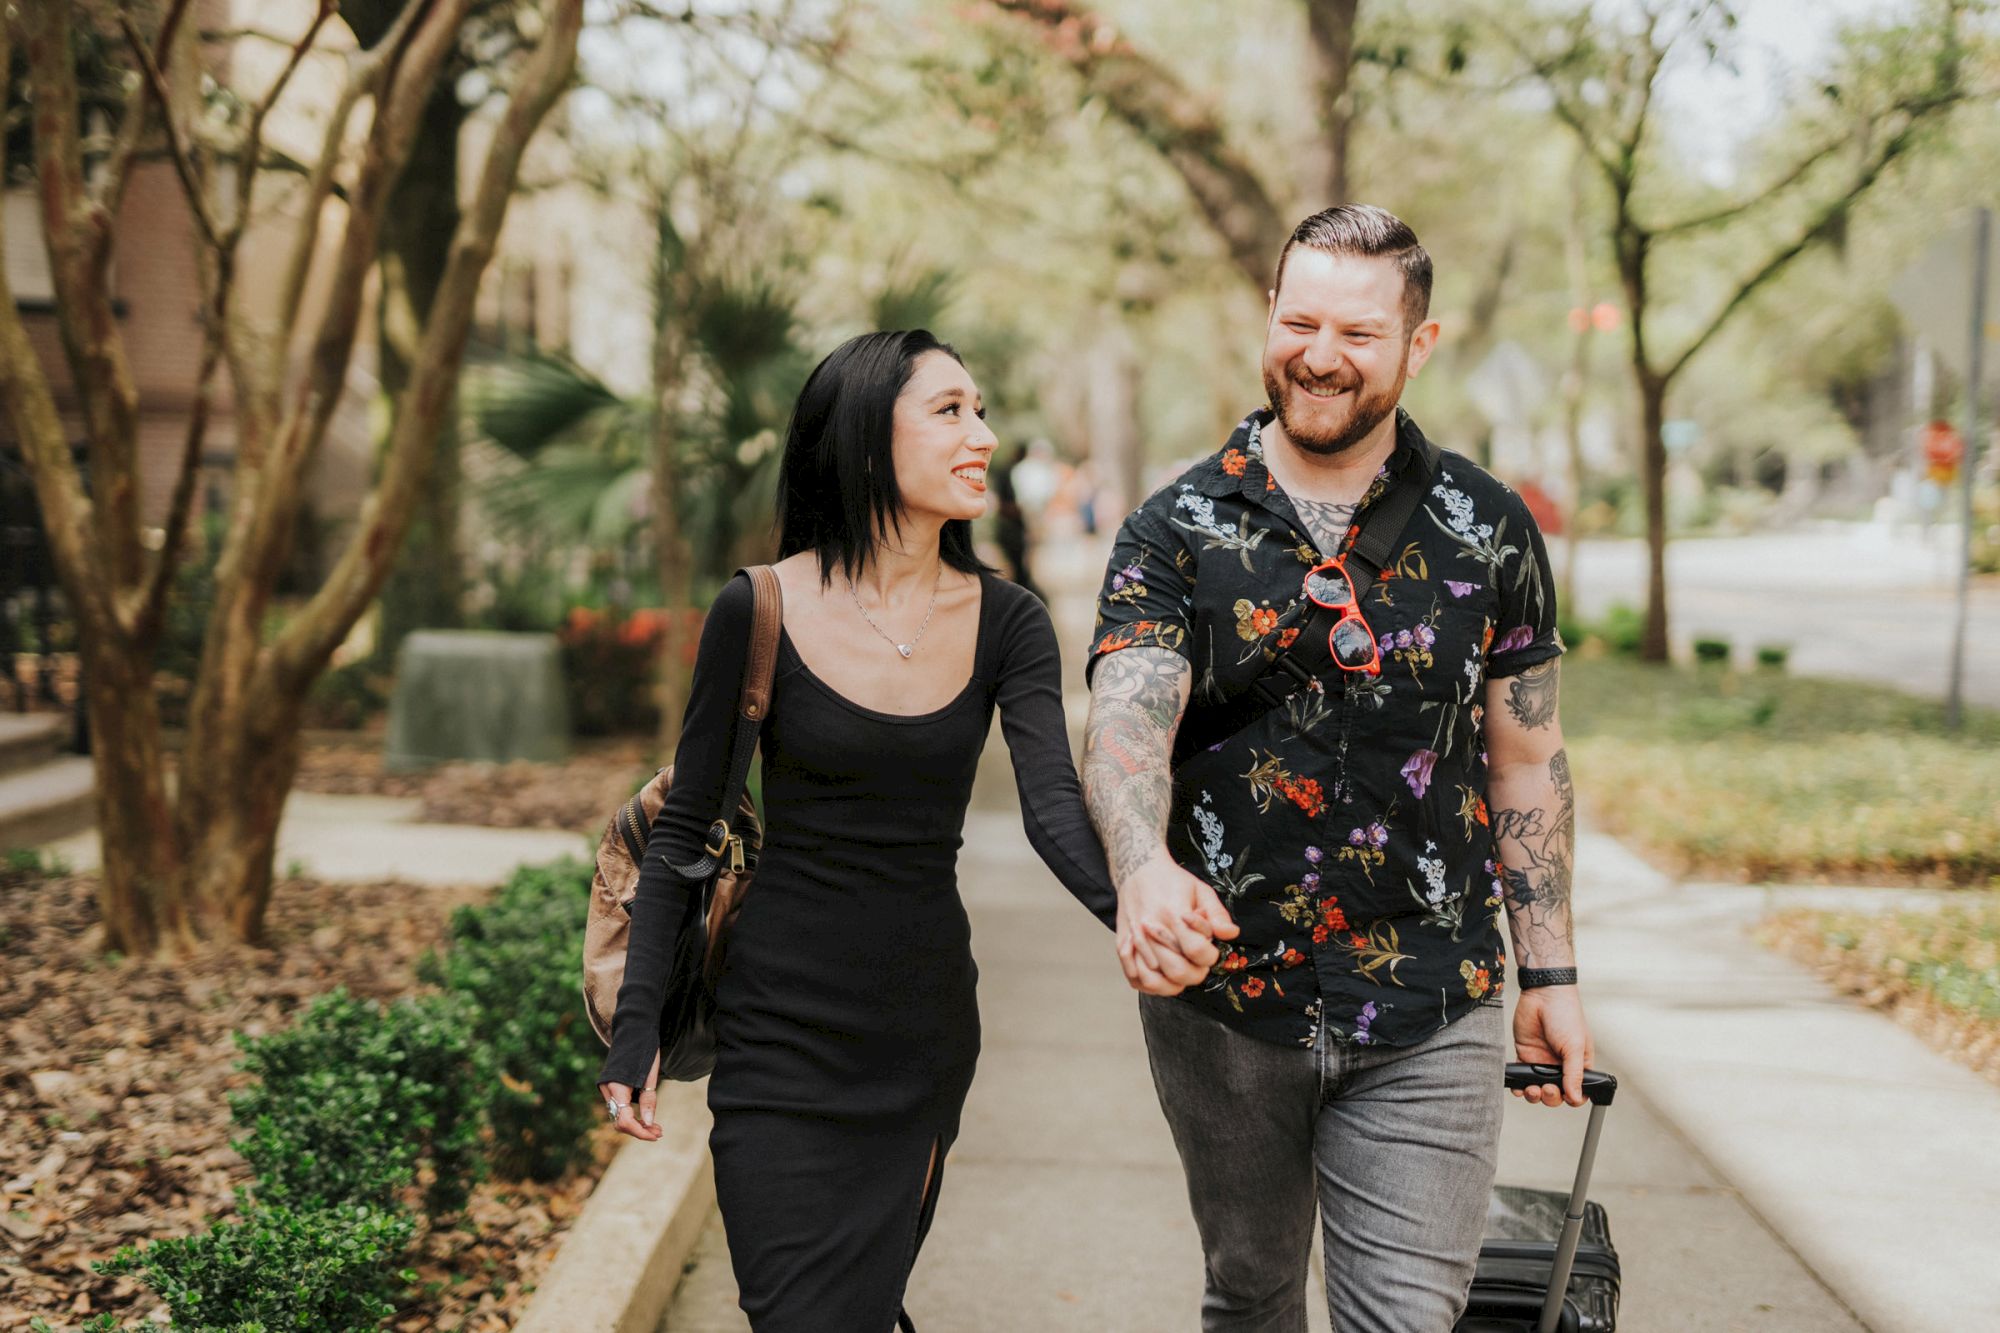 A couple is walking down a tree-lined sidewalk, holding hands and smiling, with the man pulling a suitcase and the woman carrying a backpack.